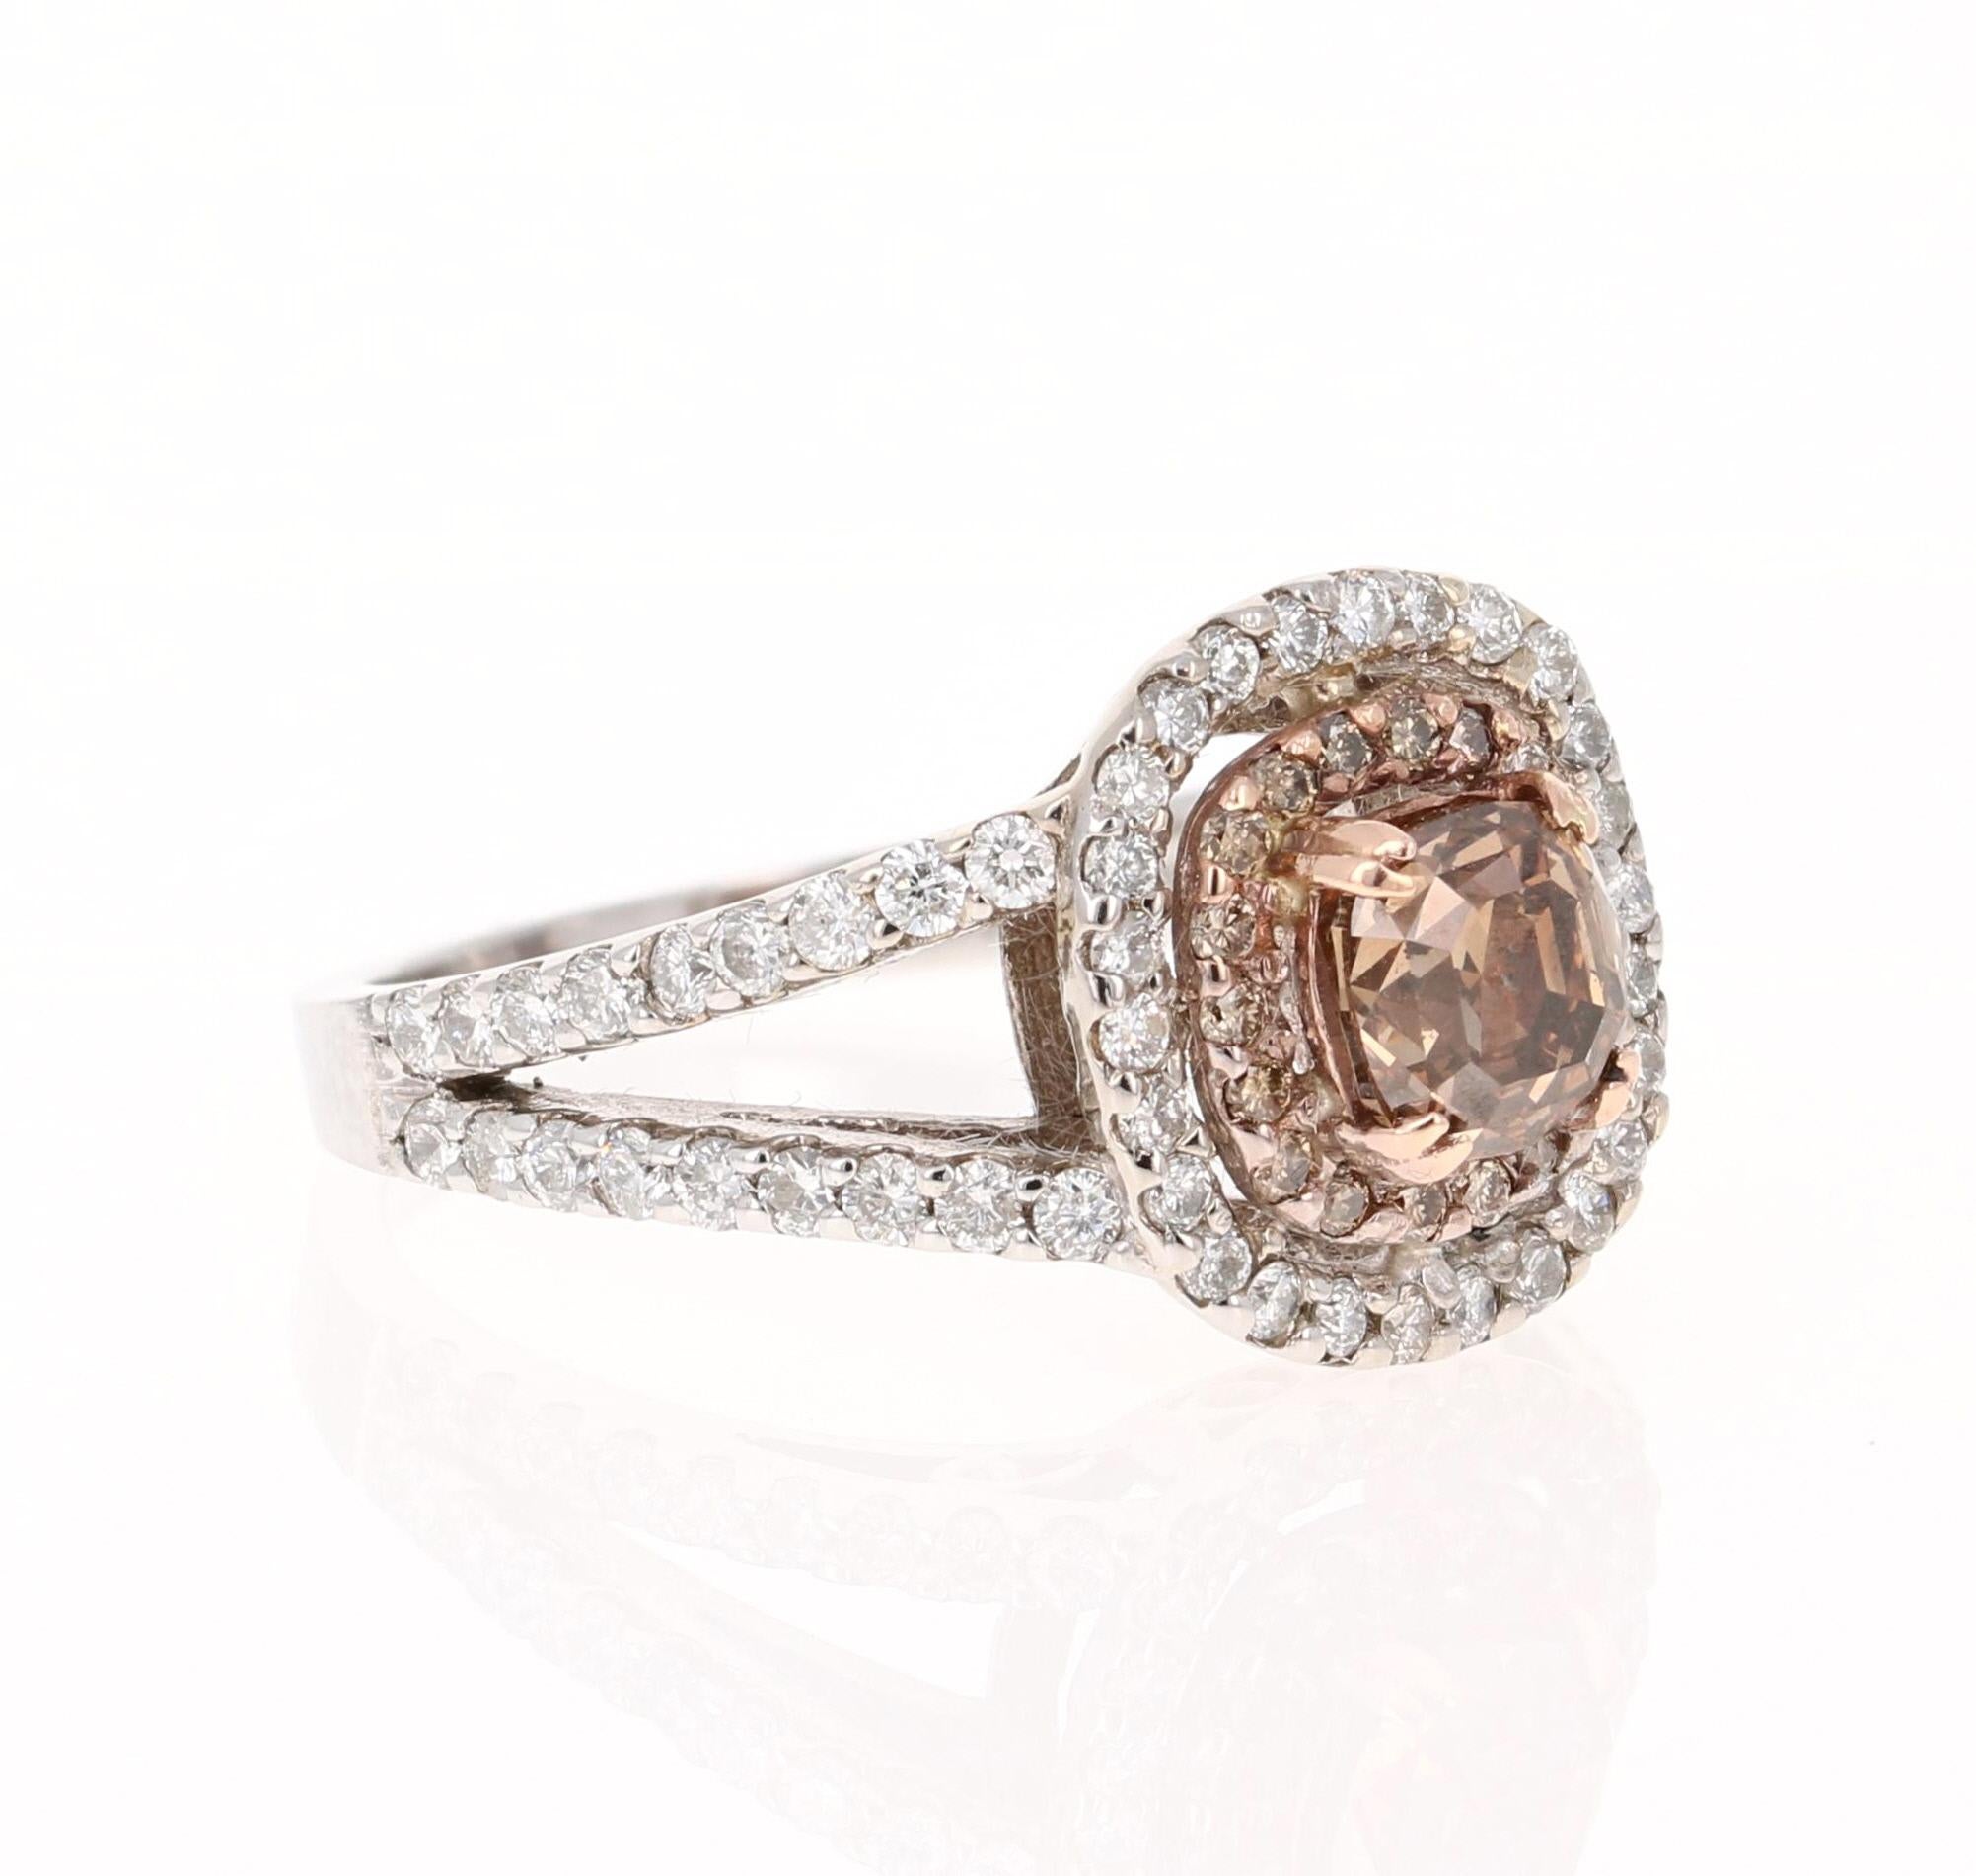 This ring has a Brown Cushion Cut Natural Diamond as its center weighing 1.09 Carats and is surrounded by a simple halo of 18 Round Cut Natural Brown Diamonds that weigh 0.14 Carats. It is further adorned with 62 Round Cut White Diamonds that weigh